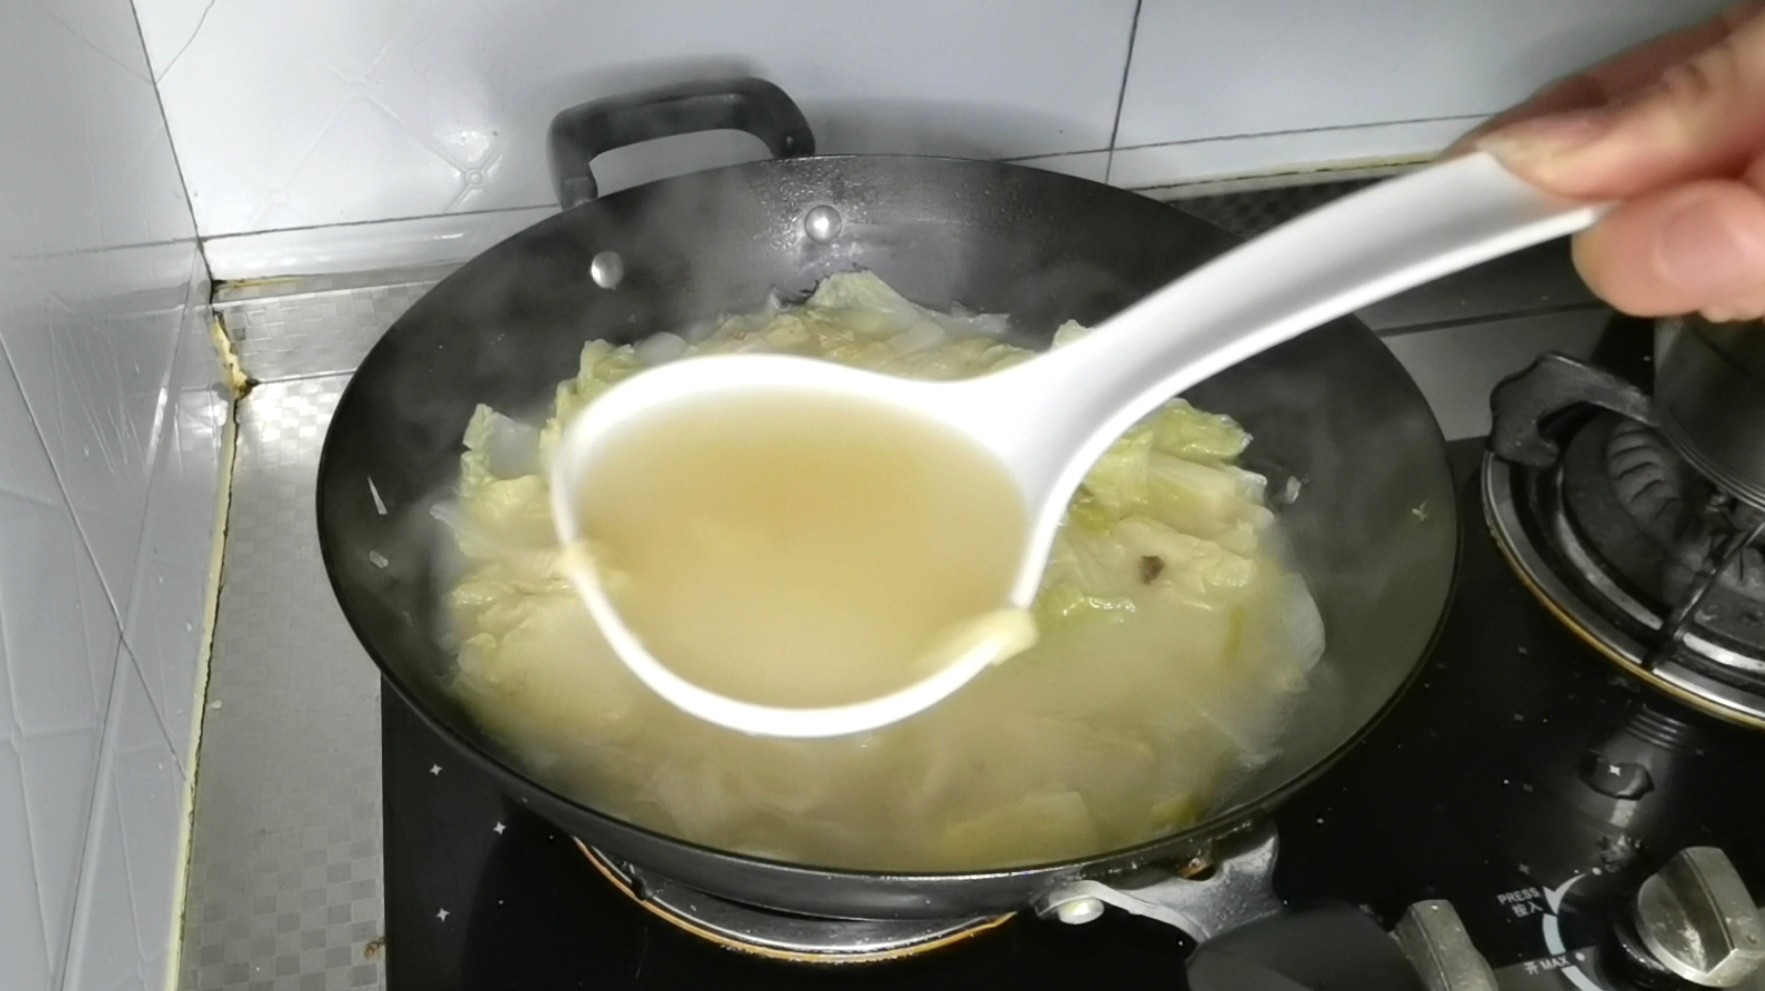 Frozen Tofu Stewed with White Cabbage in Broth recipe